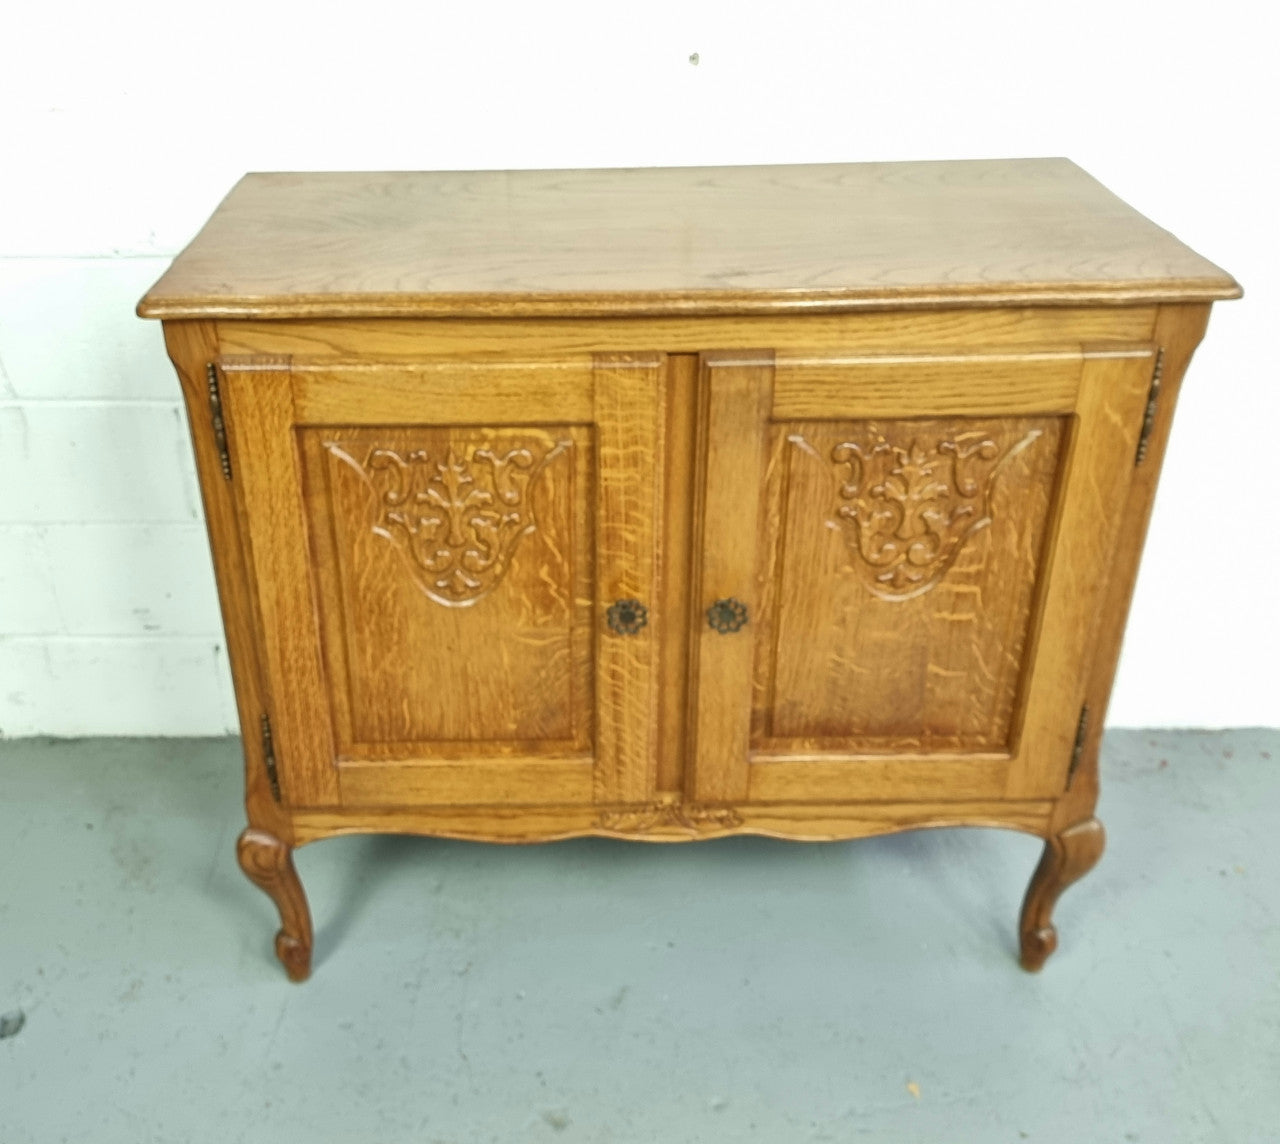 Vintage French Oak two door cabinet which would make an ideal TV cabinet or storage unit. In good original detailed condition.